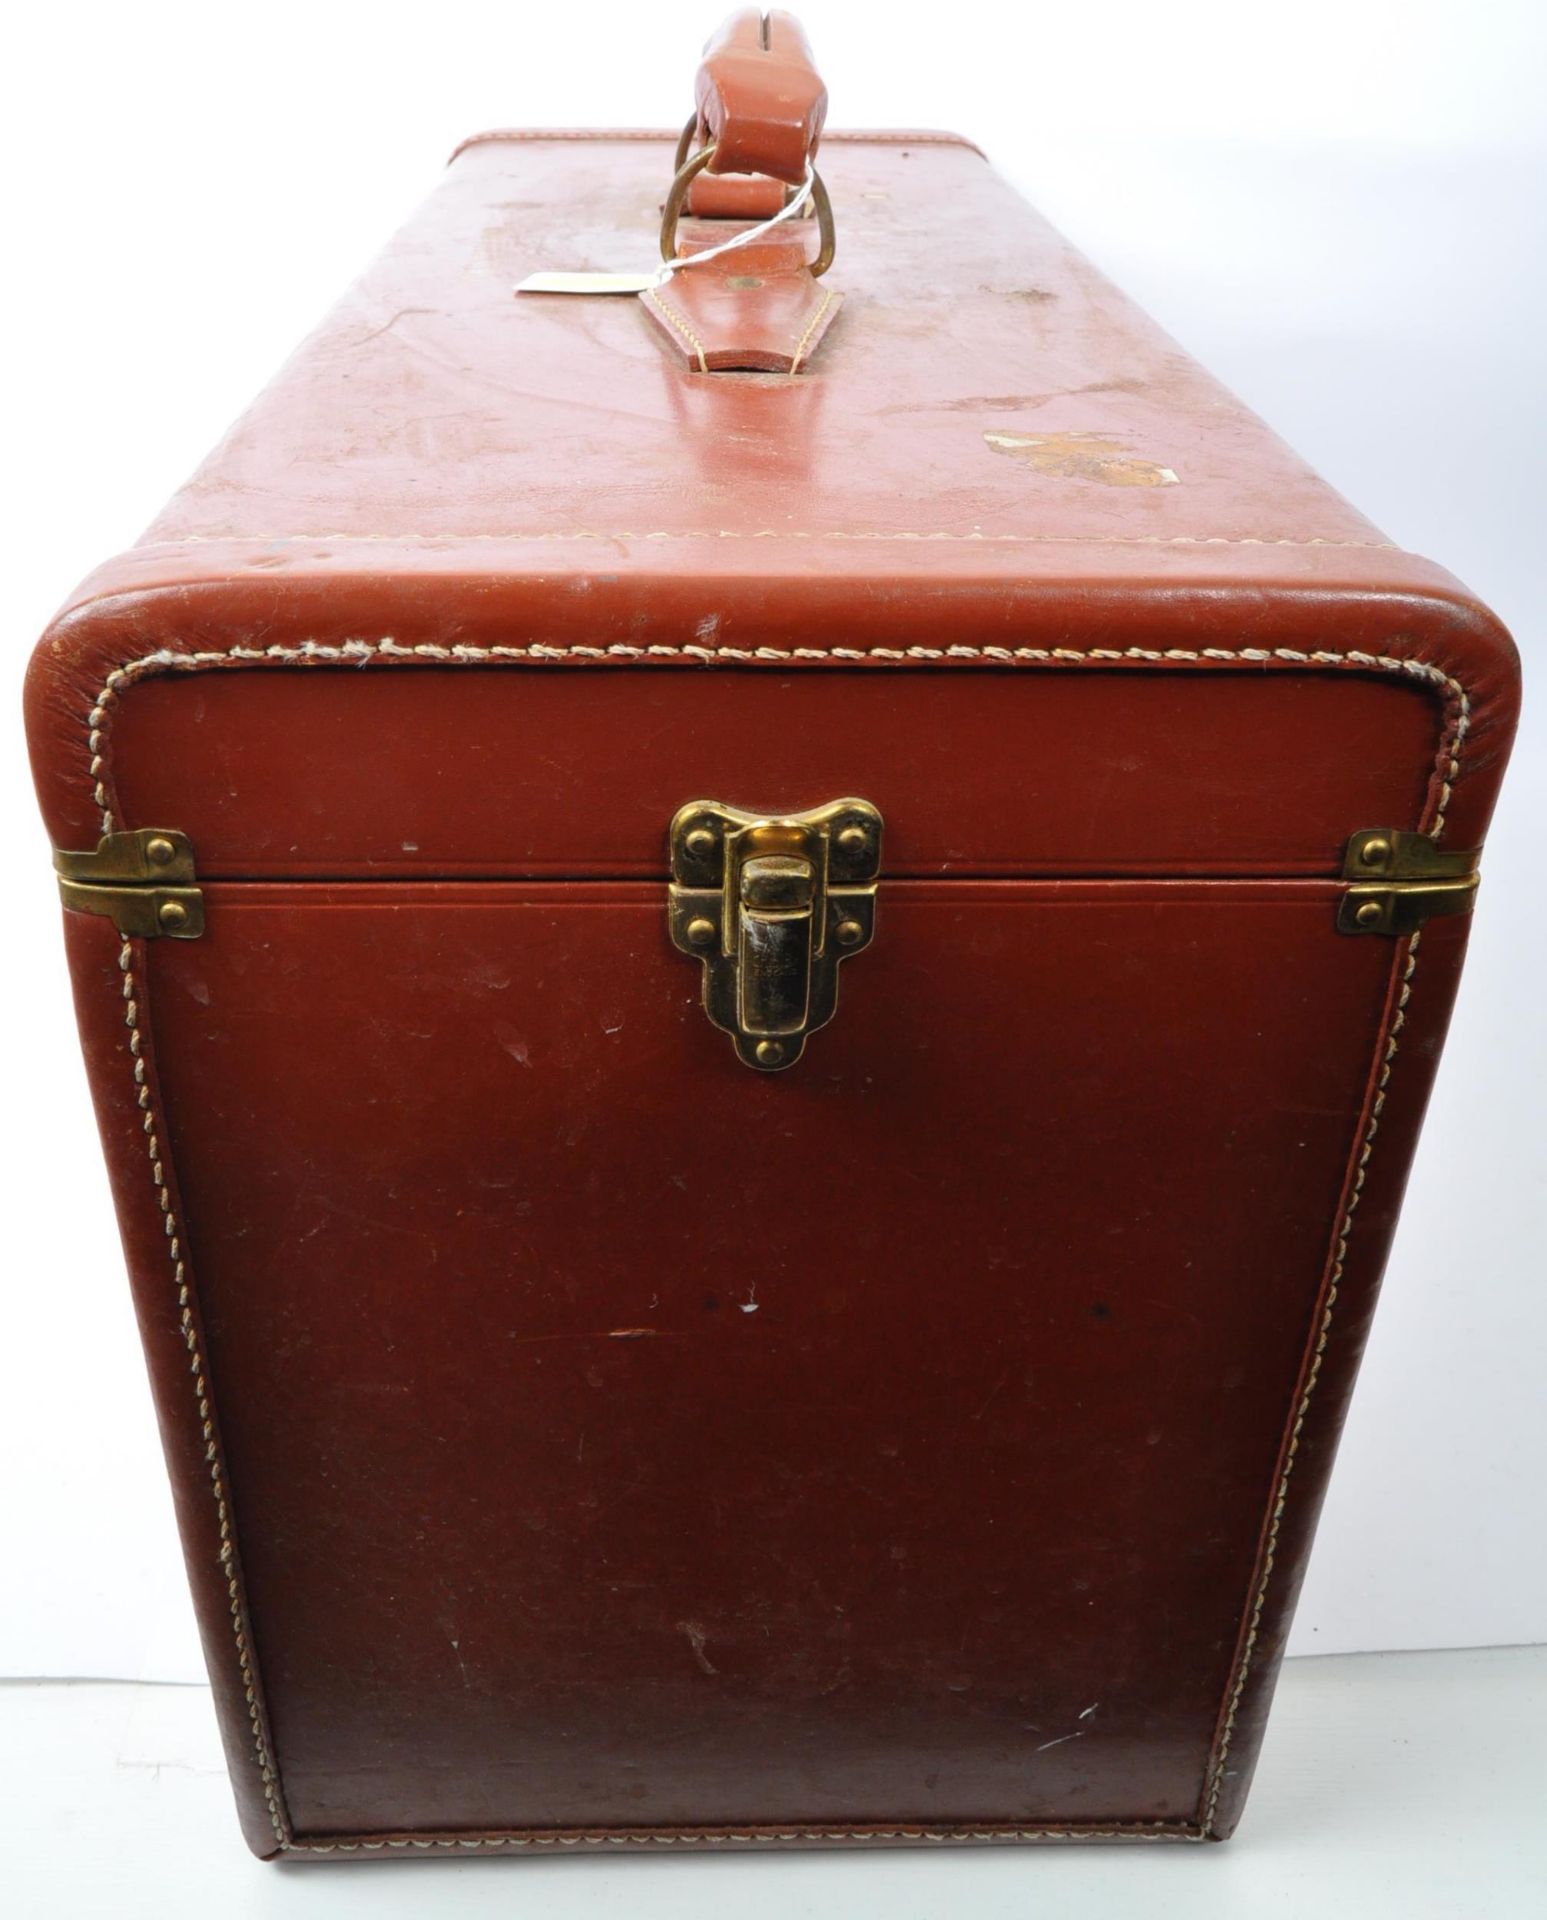 RED LEATHER TRAVEL SUITCASE TRUNK - EARLY 20TH CENTURY - Image 6 of 6